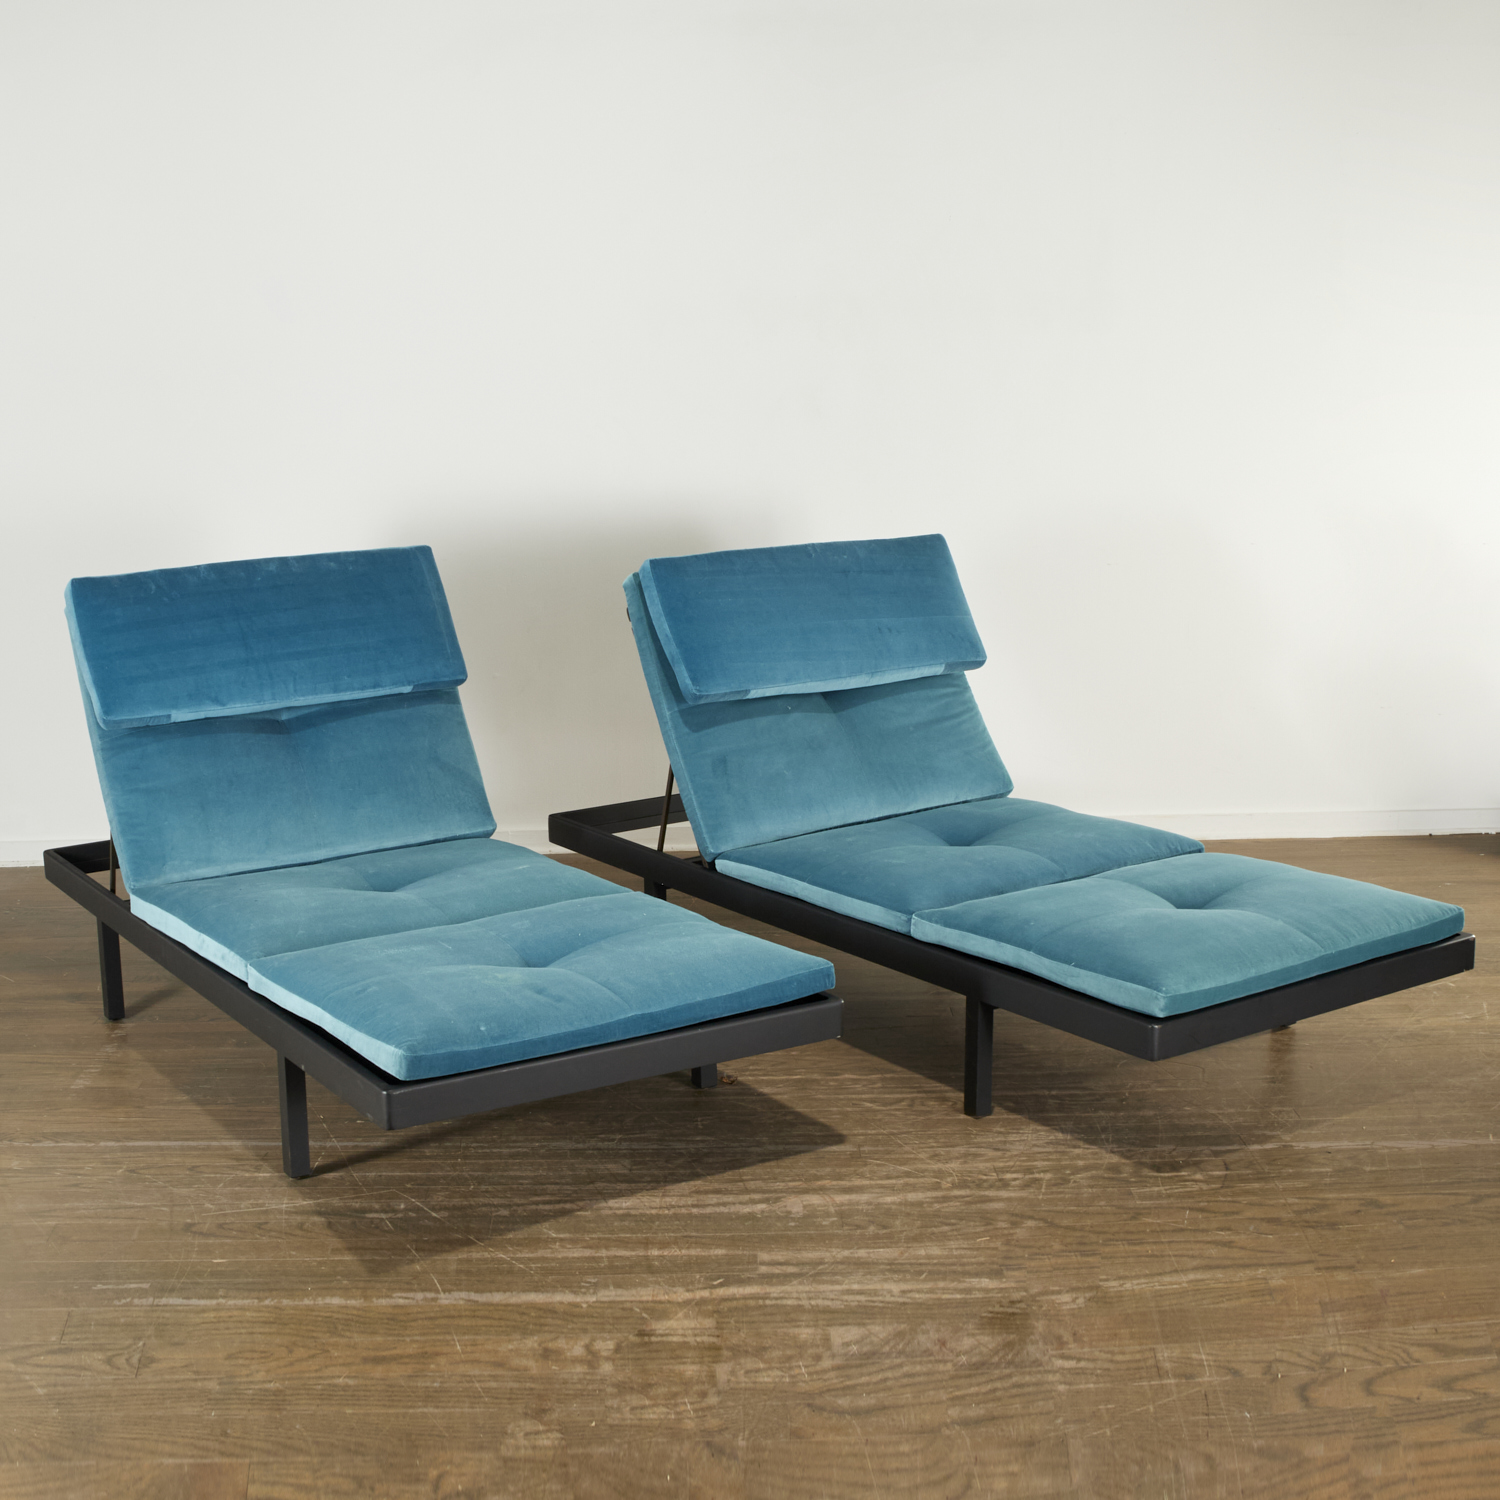 PAIR BASSAMFELLOWS CB 41 DAYBED 3c2518